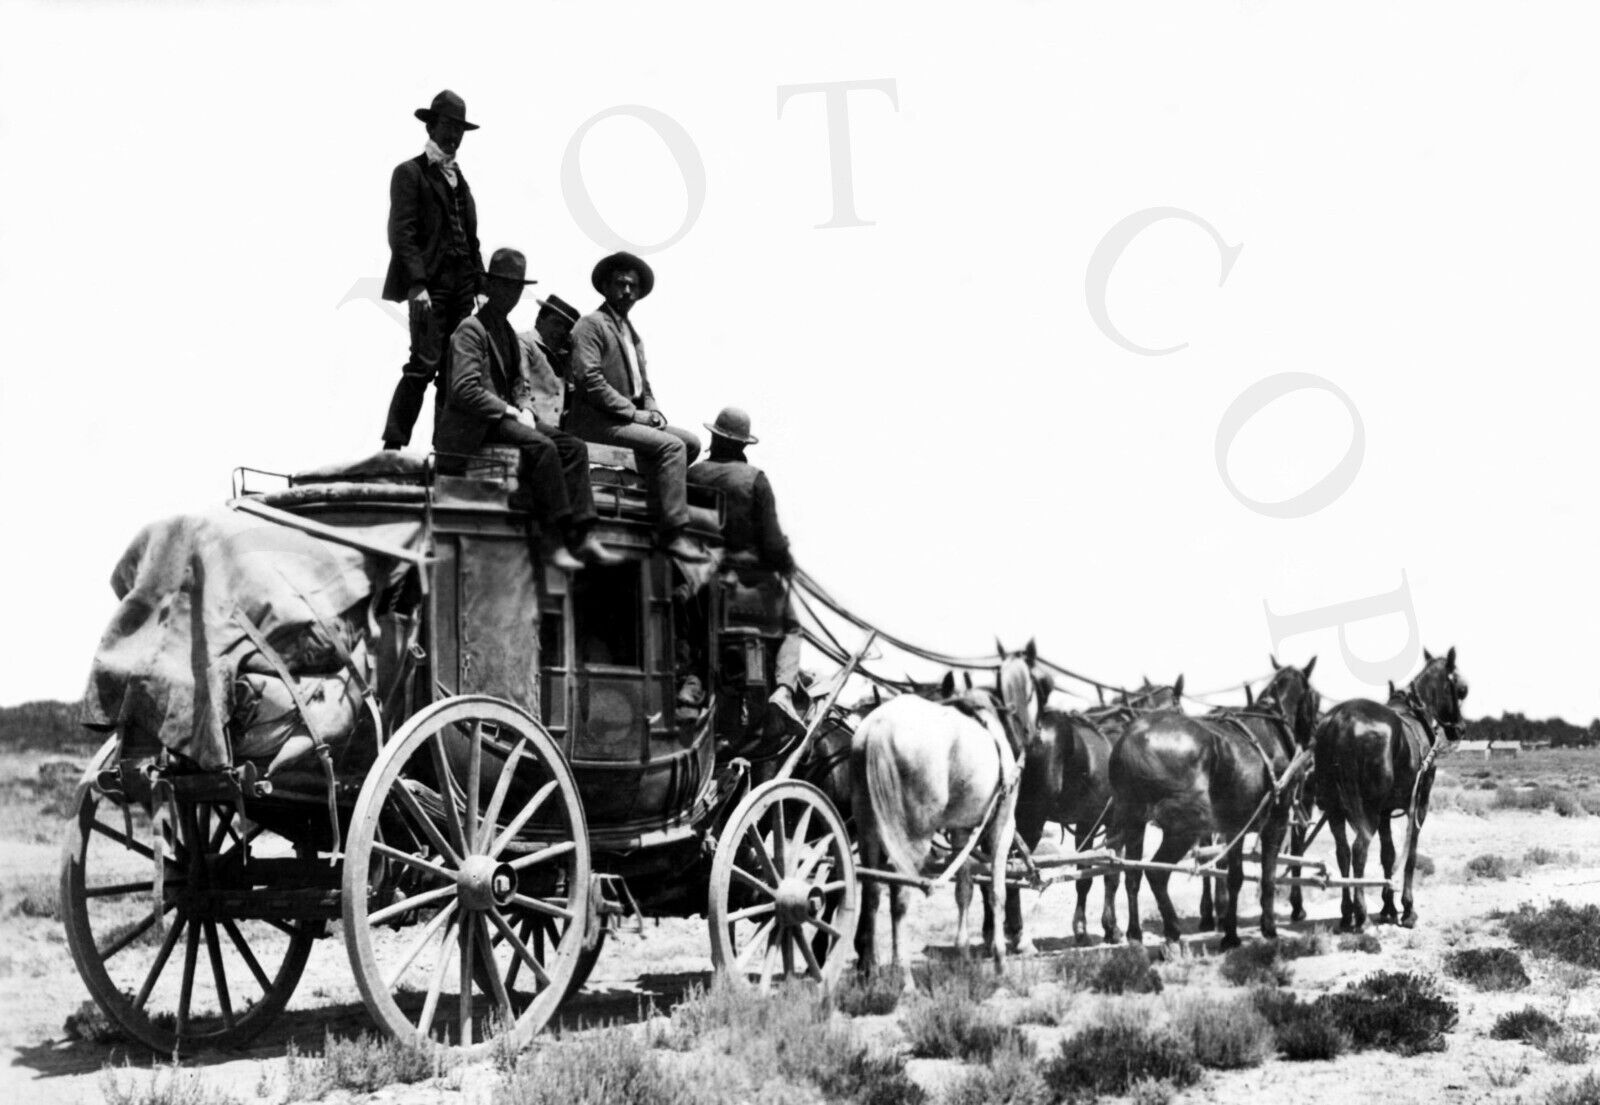 ANTIQUE OLD COWBOY WESTERN 8X10 REPRINT PHOTOGRAPH OF STAGECOACH # 2